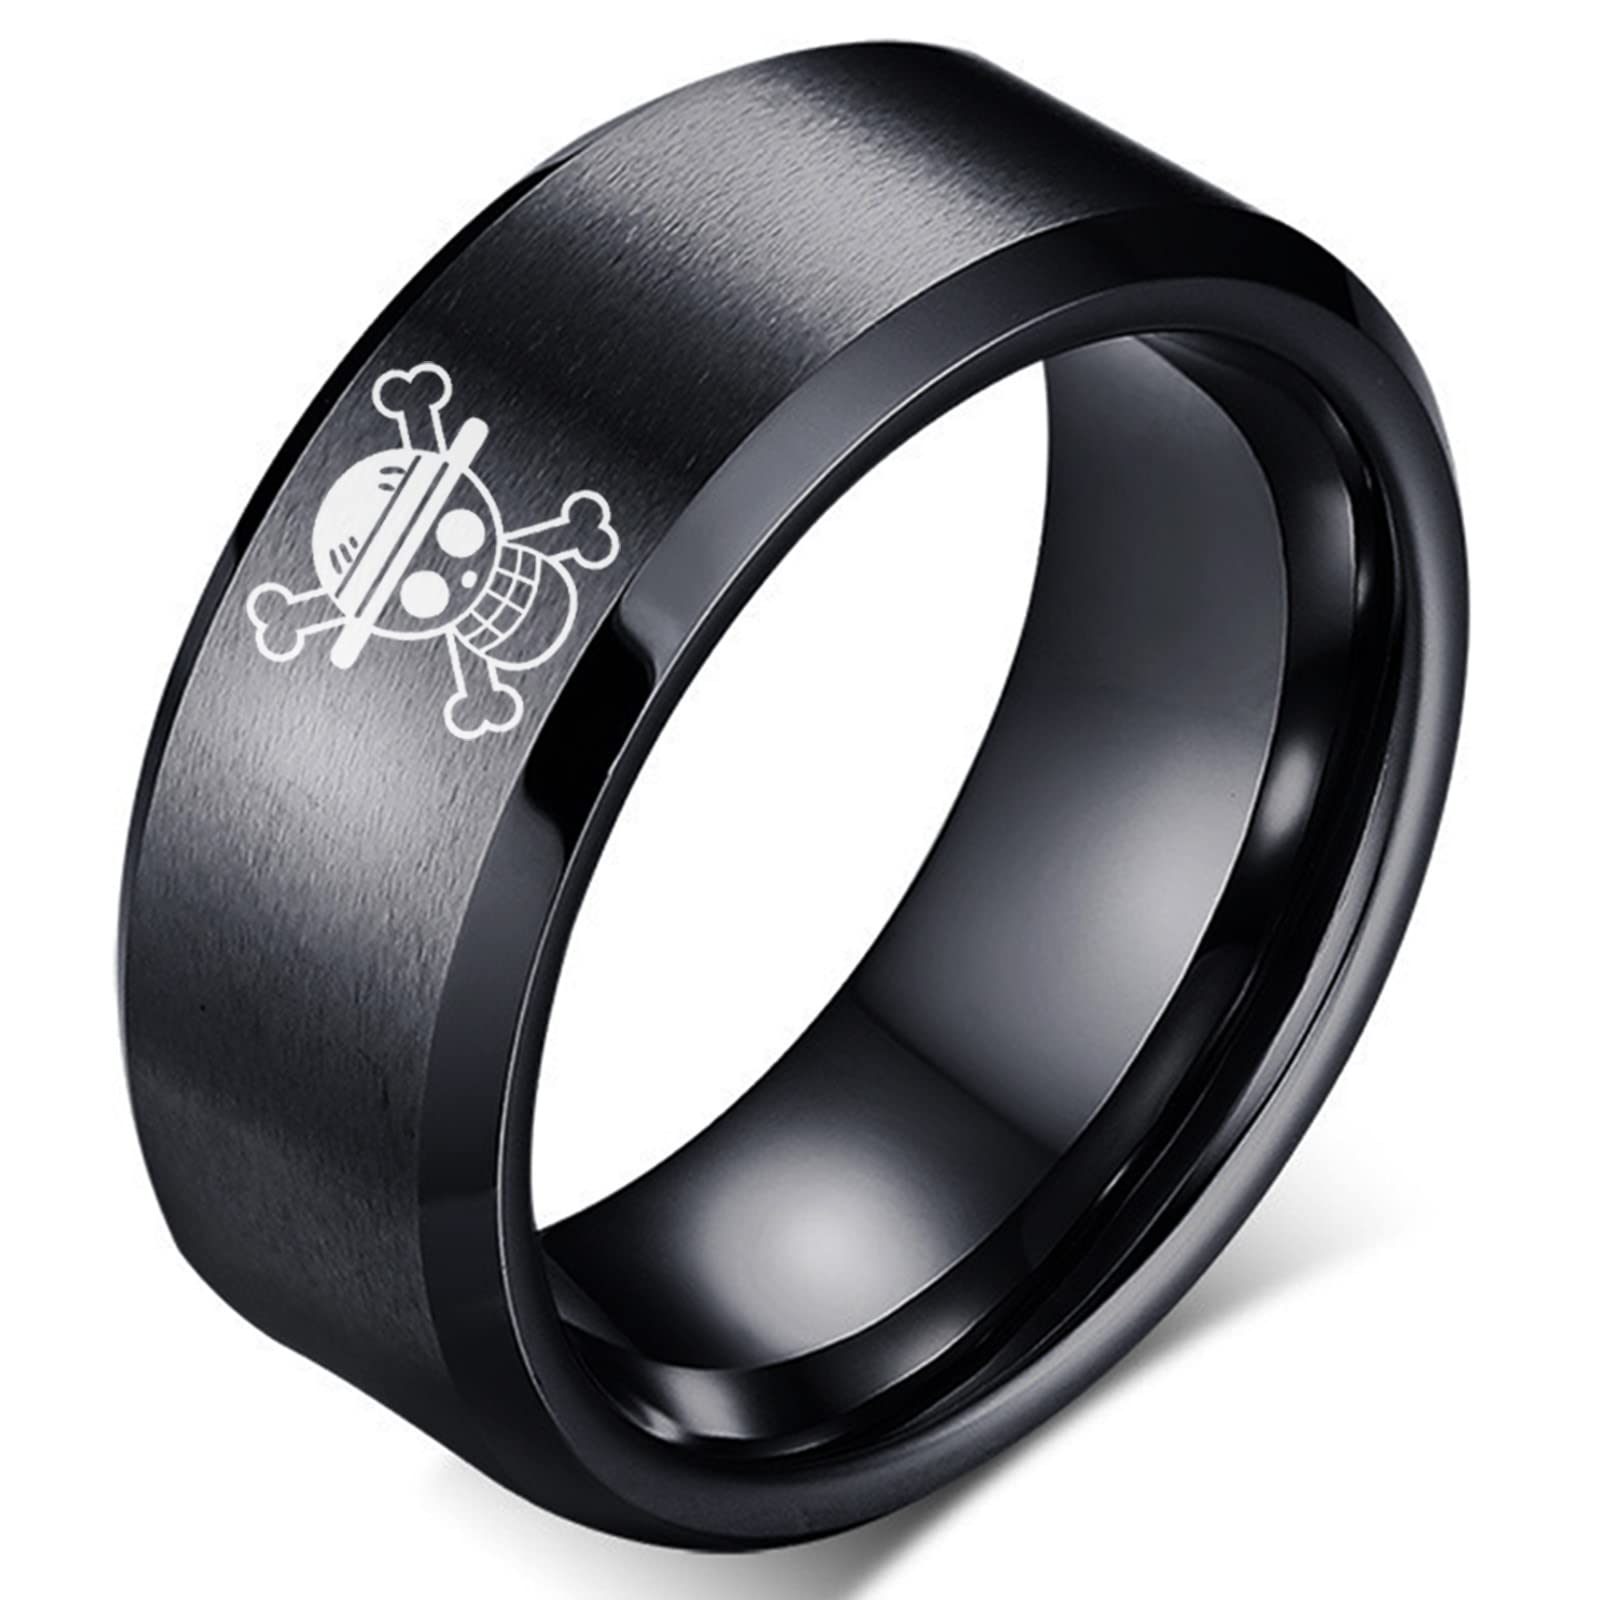 ANIME ONE PIECE Trafalgar Law Silver Ring Adjustable Jewellery Cosplay Gift  £4.99 - PicClick UK